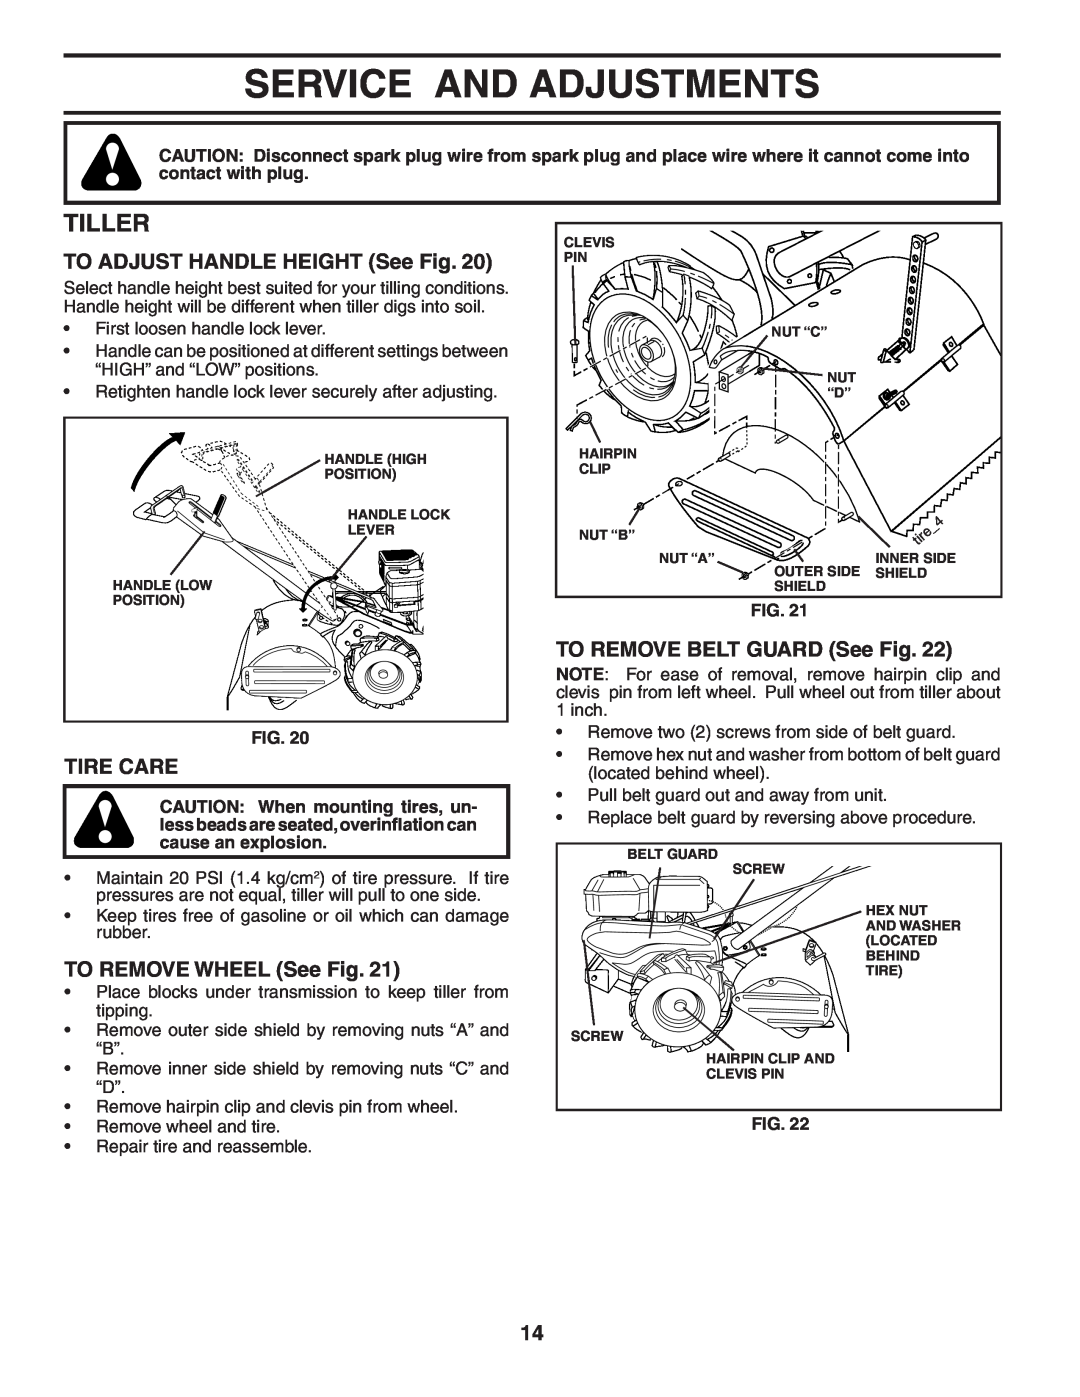 Poulan 403701 Service And Adjustments, Tiller, TO ADJUST HANDLE HEIGHT See Fig, Tire Care, TO REMOVE WHEEL See Fig 